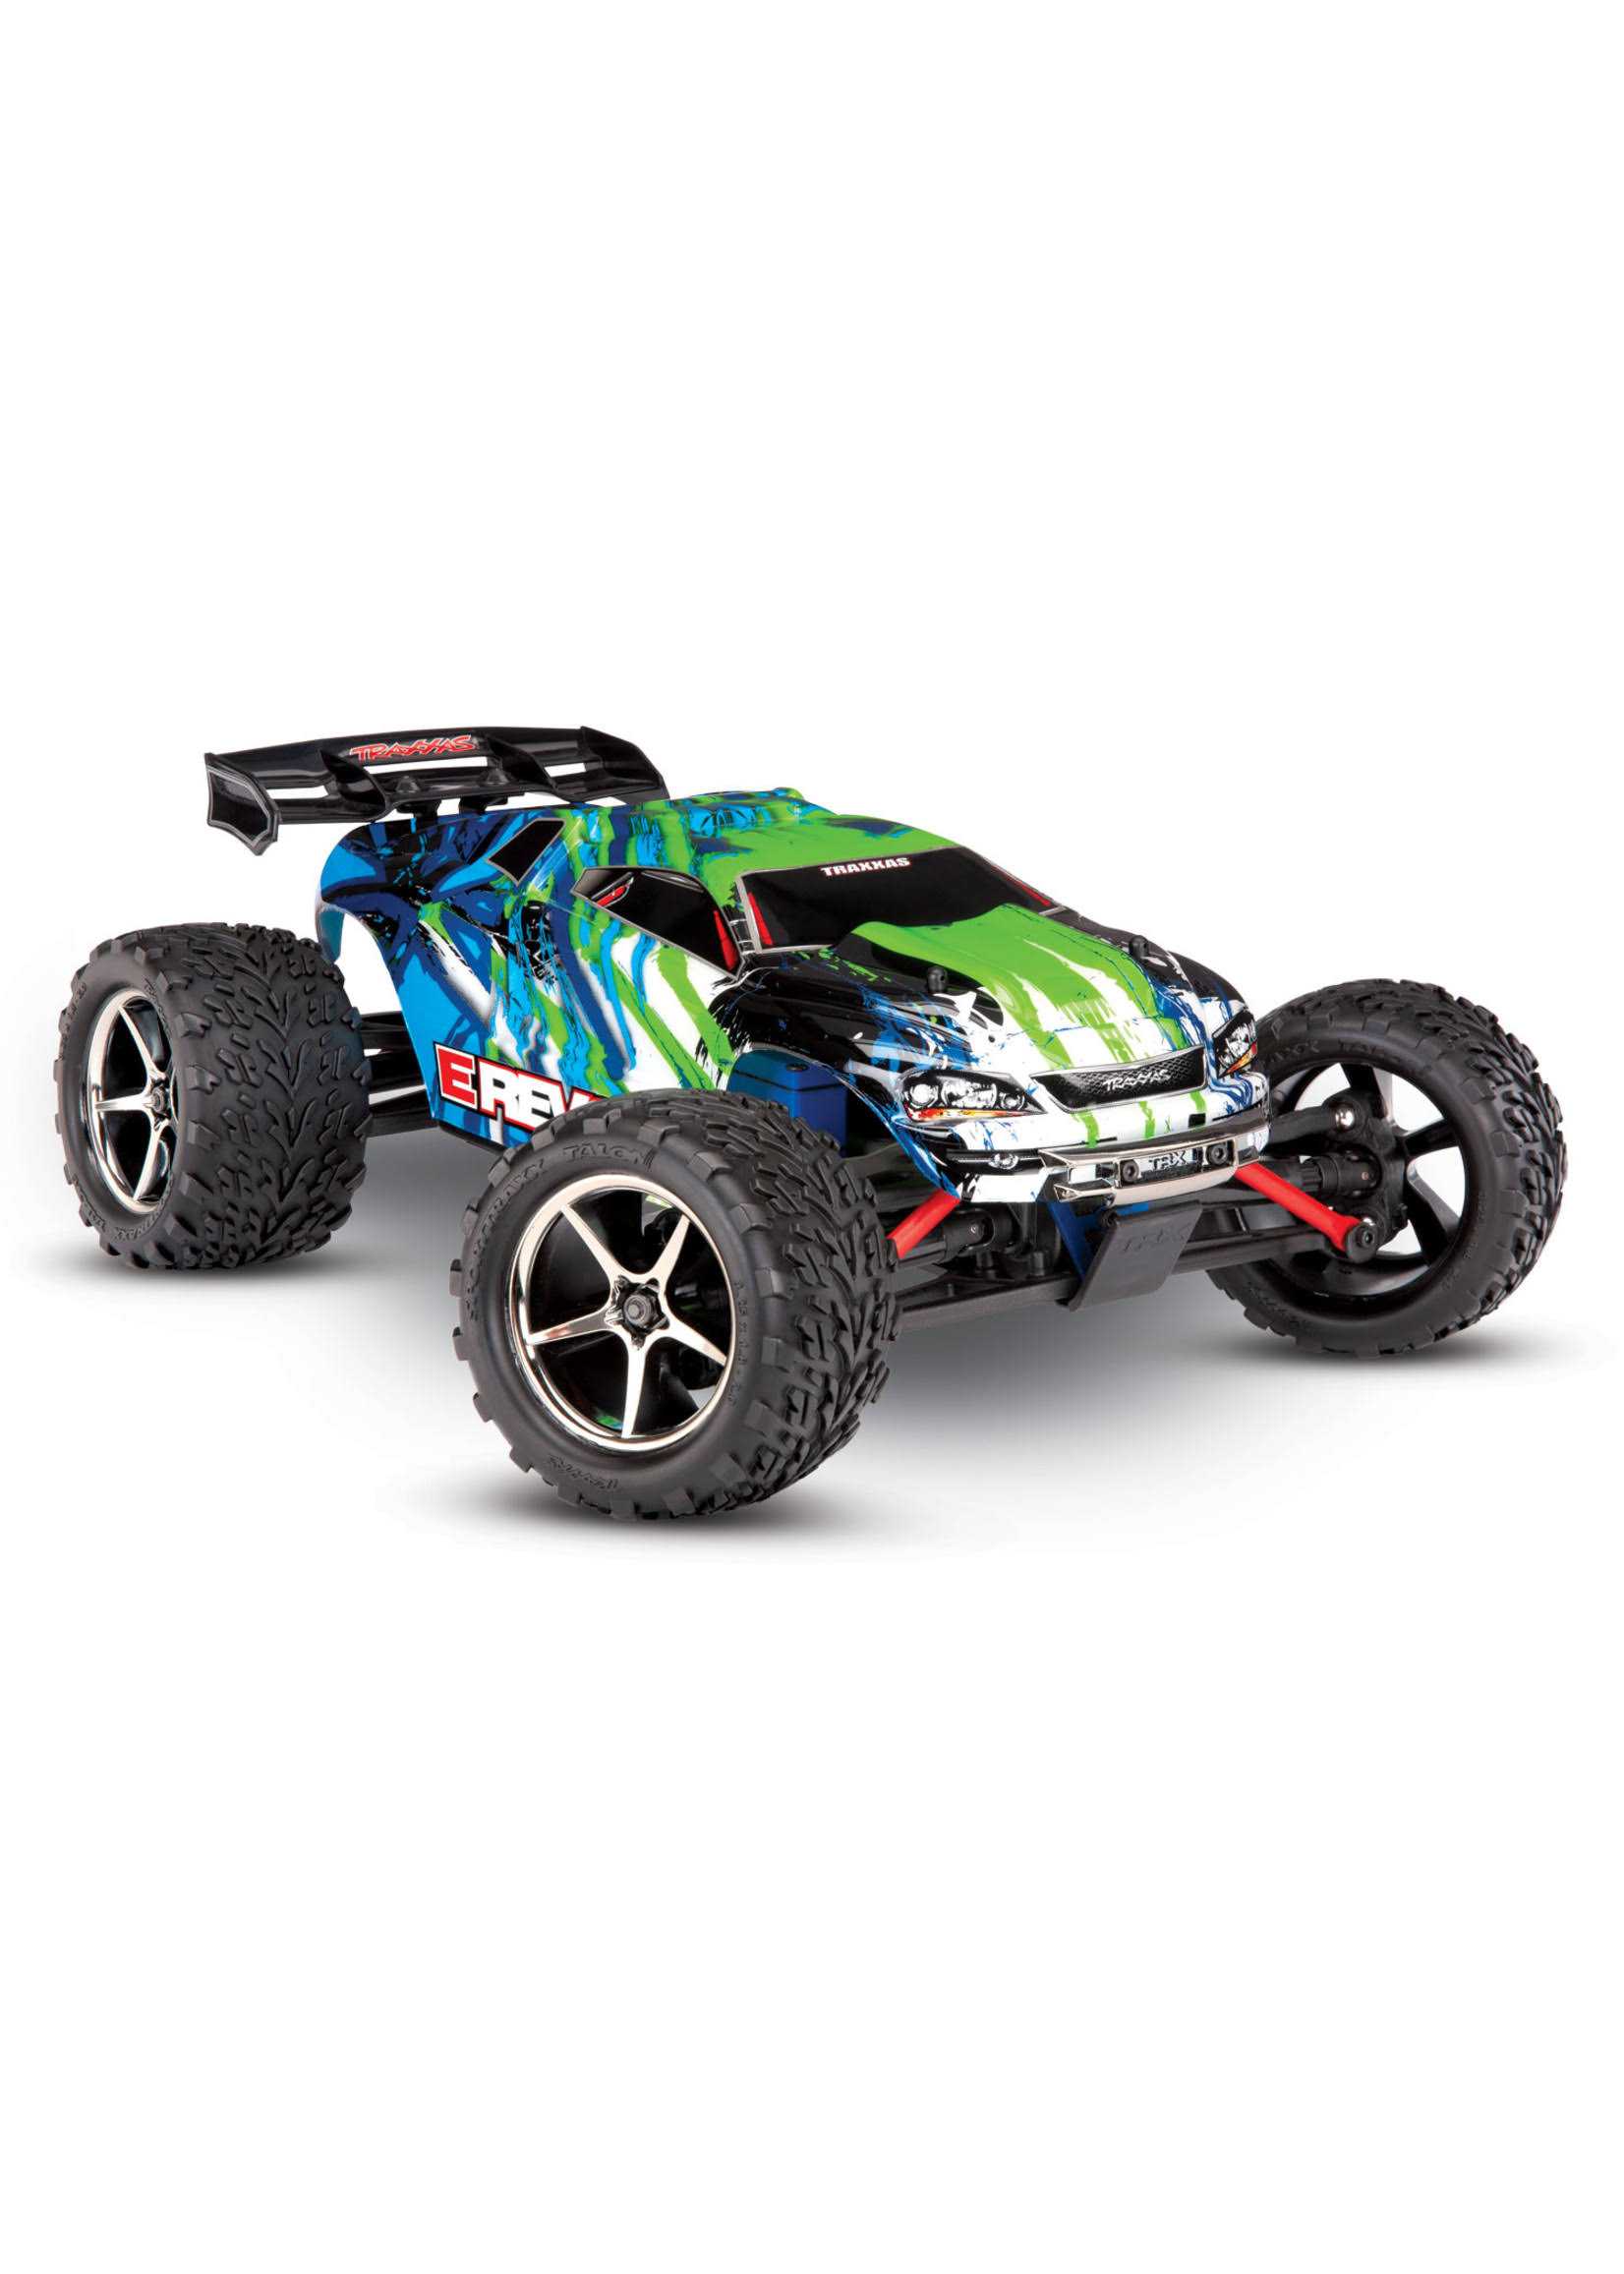 Traxxas 1/16 E-Revo 4WD Brushed RTR Truck - Green